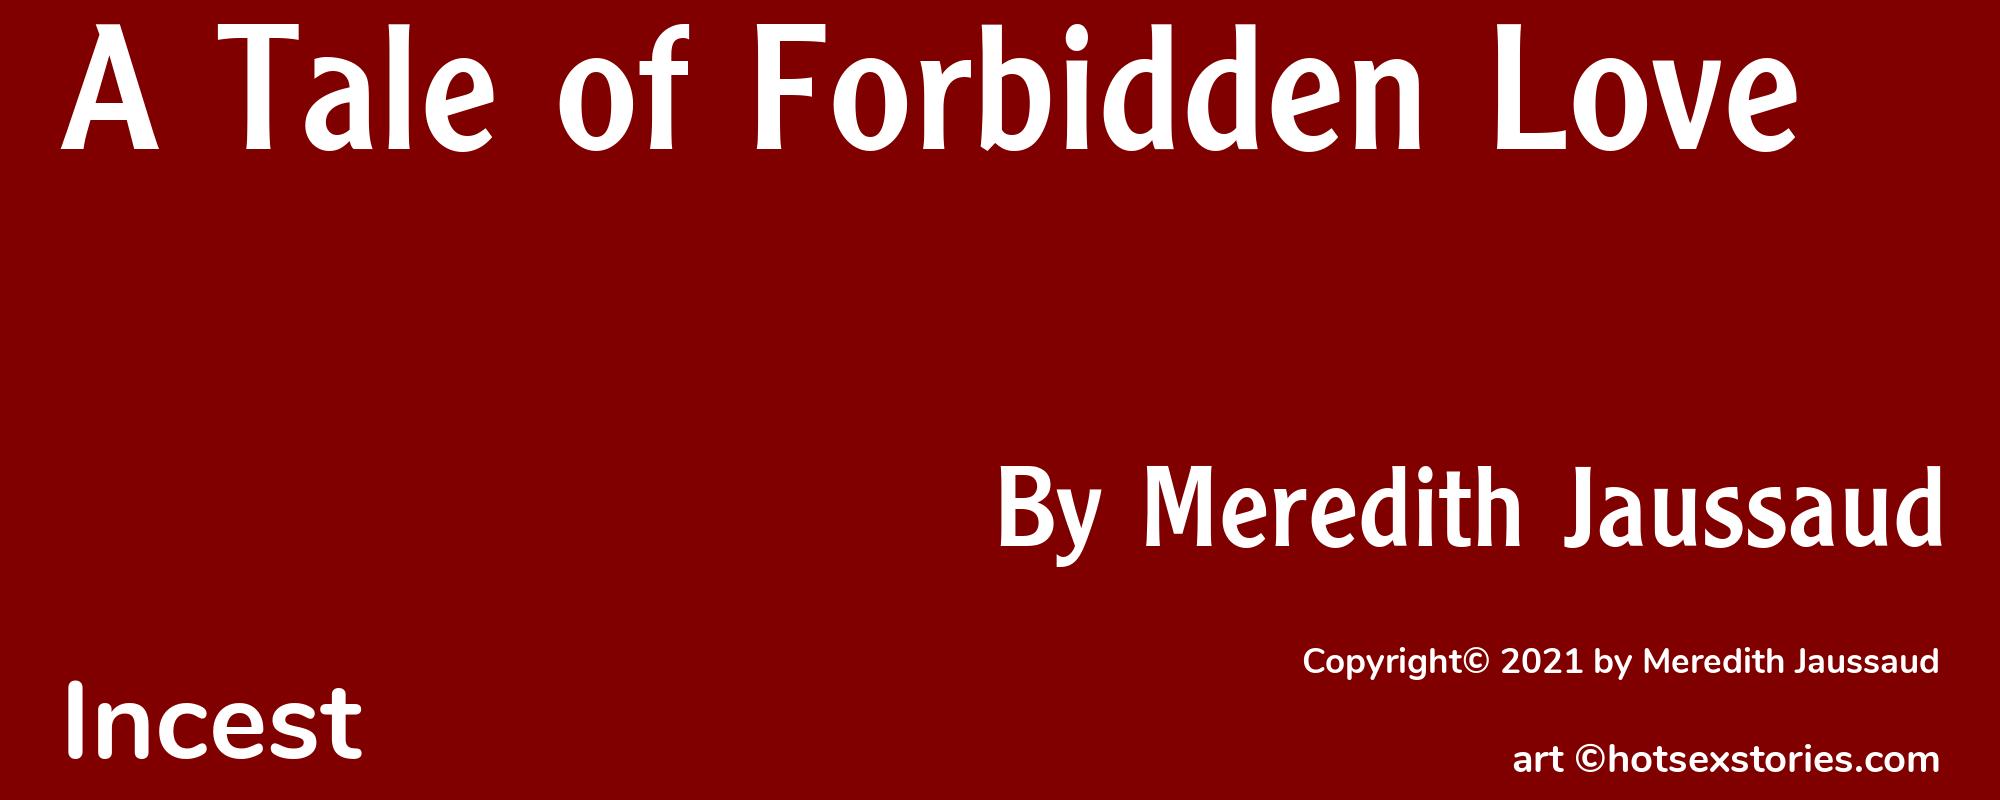 A Tale of Forbidden Love - Cover